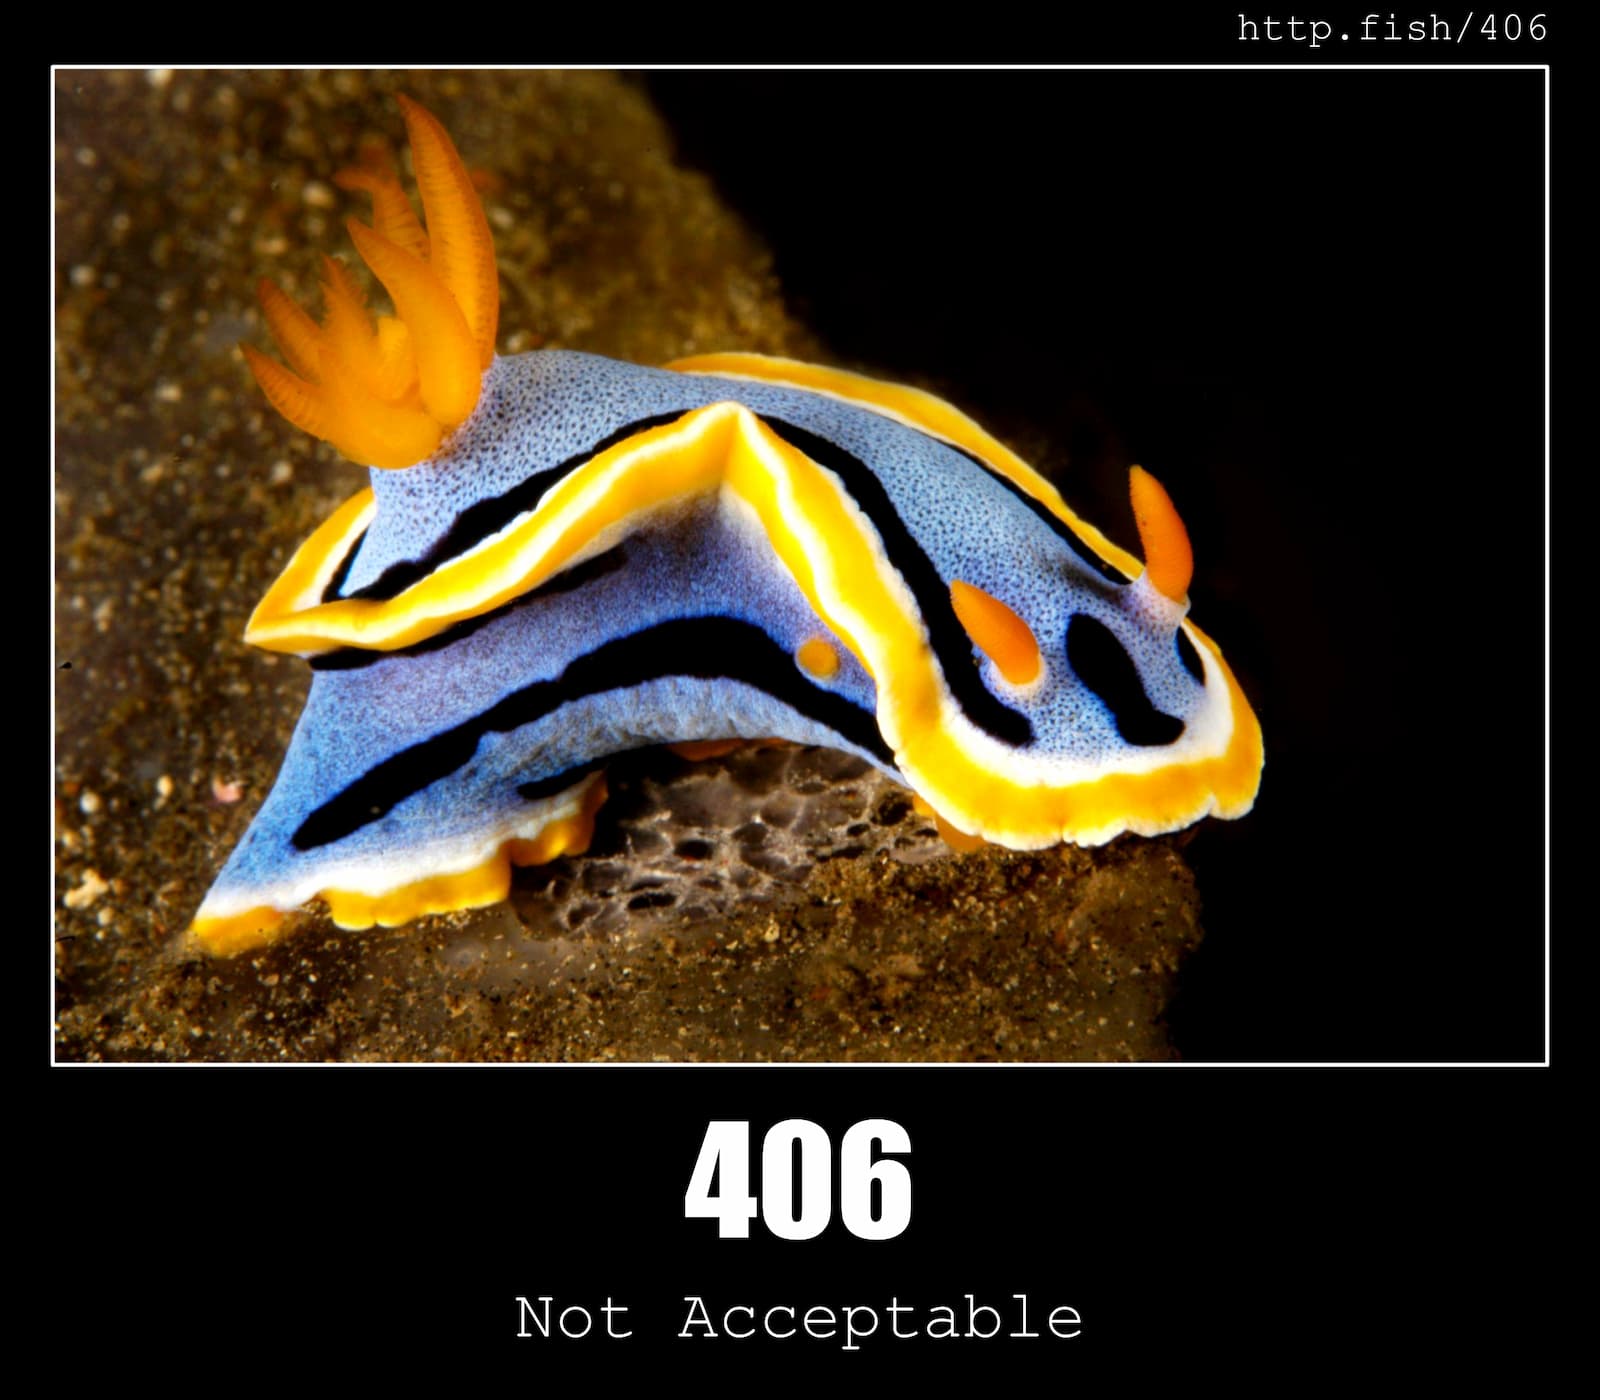 HTTP Status Code 406 Not Acceptable & Fish